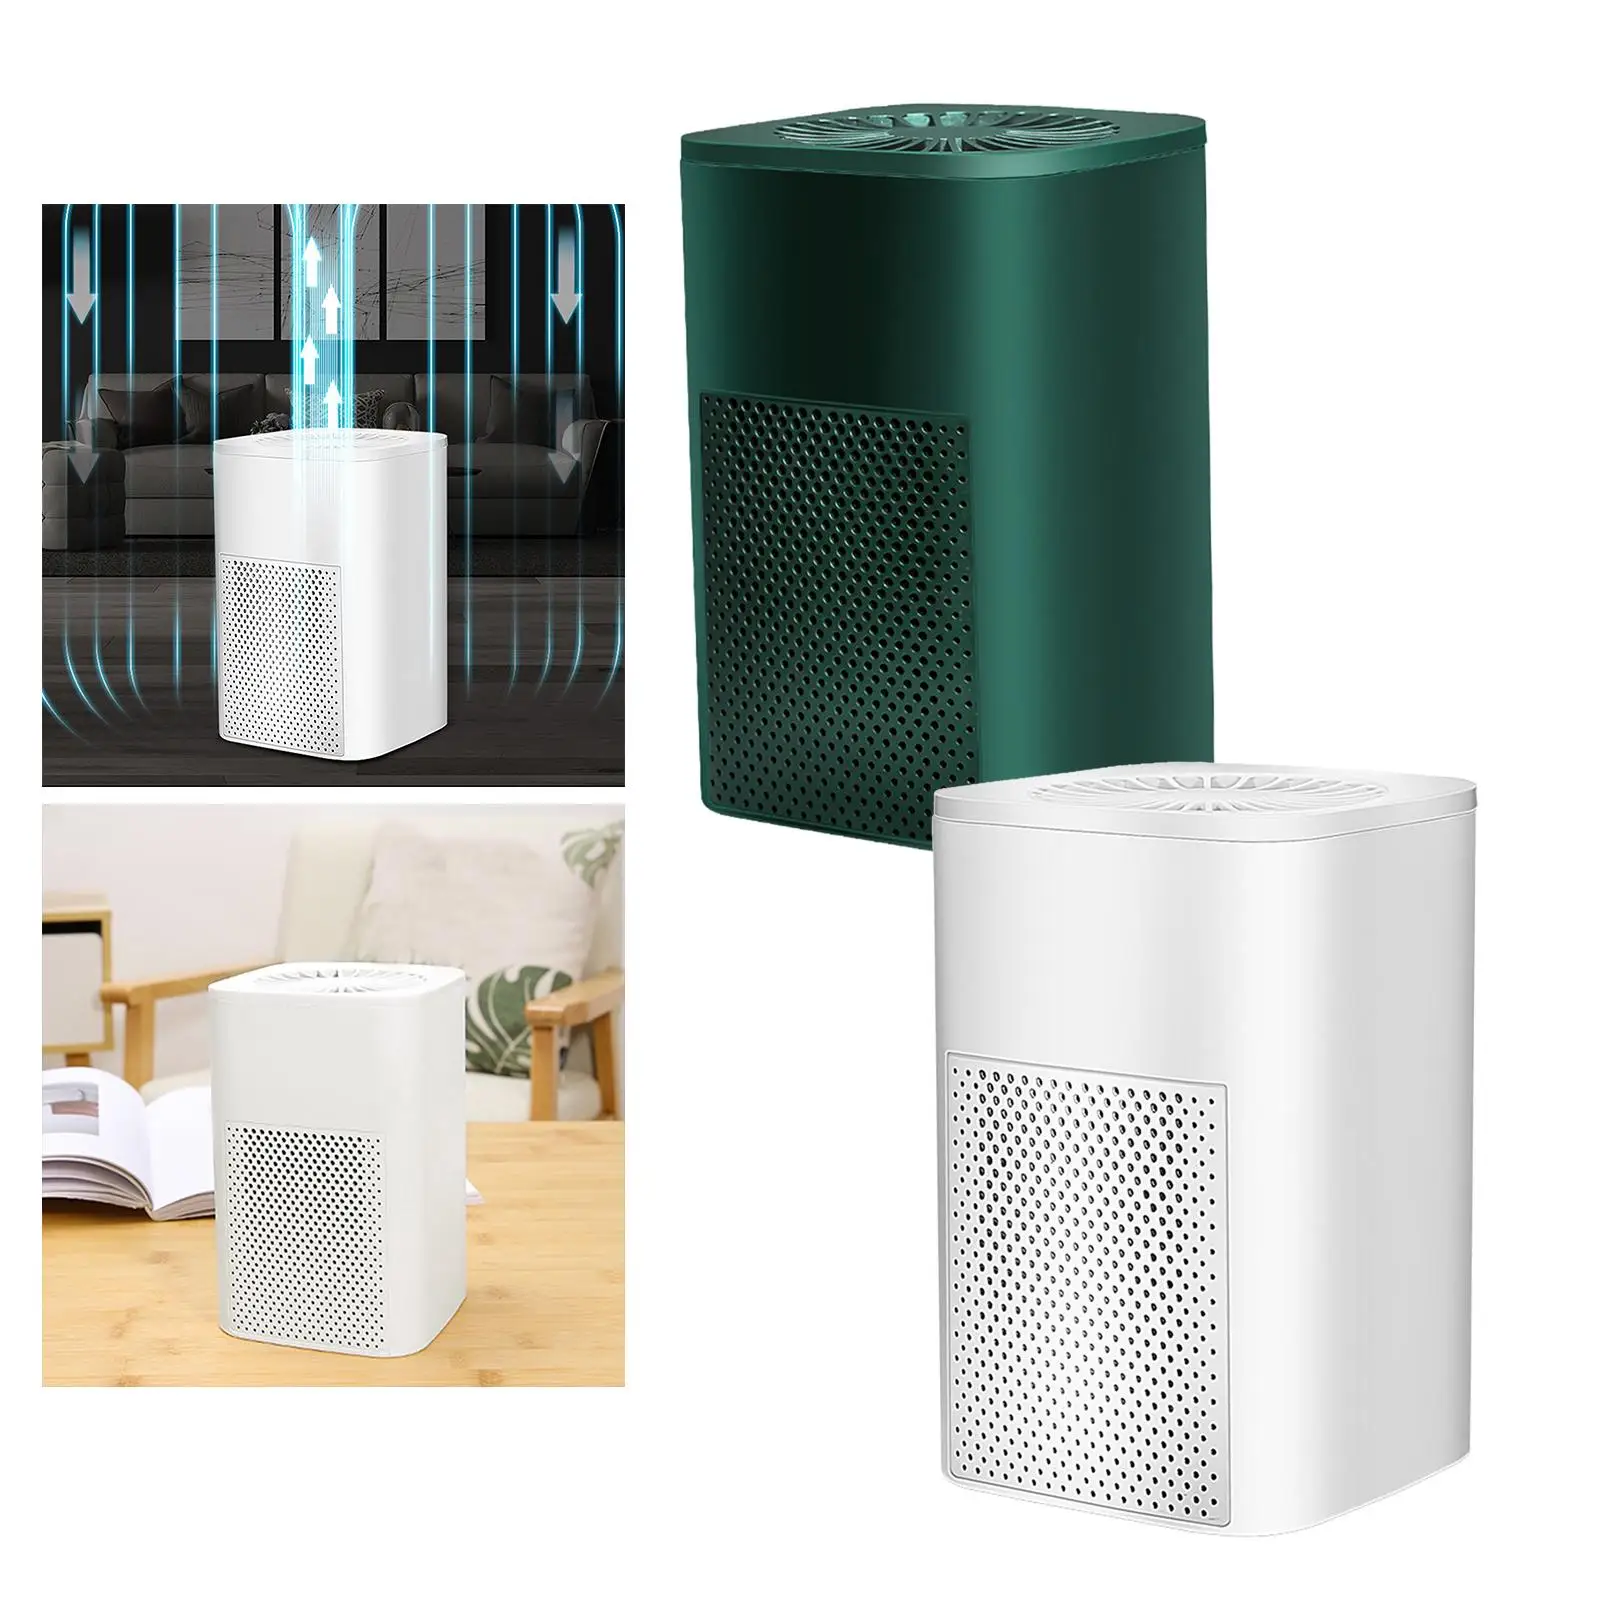 Mini Air Purifier PM2.5 Monitor 35dB Quiet Office 2 Layer Activated Carbon Travel Air Cleaner Removes Odor Dust Particles Pollen